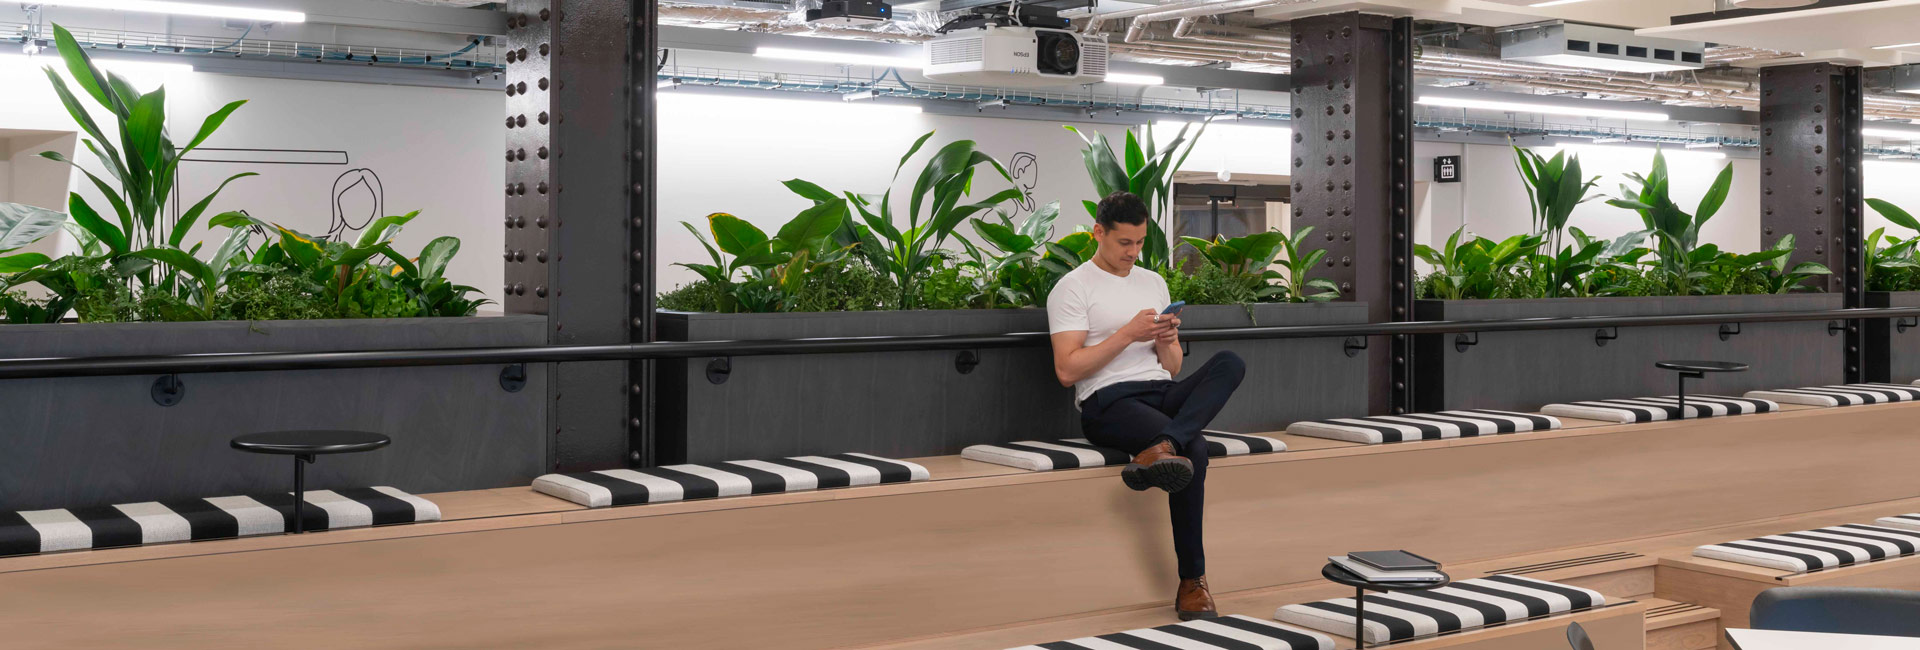 A man sitting on a bench in Page Group's London office surrounded by lush green plants, creating a serene and natural atmosphere.